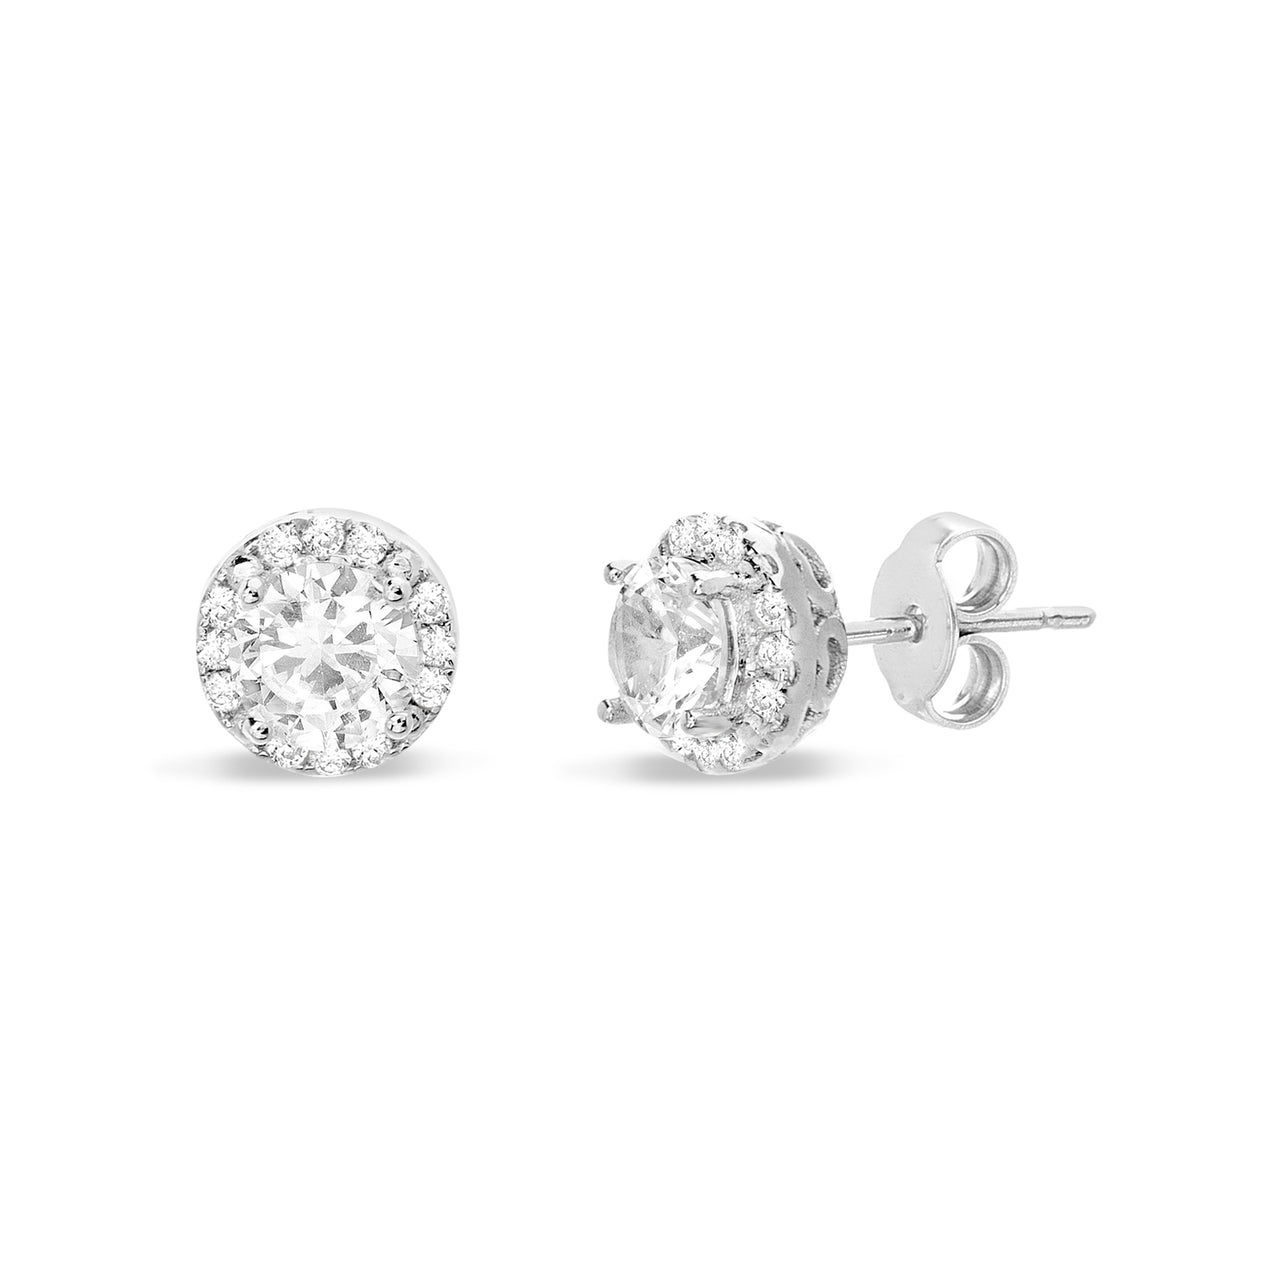 Lesa Michele Laboratory Created White Sapphire and 1/10 Cttw Diamond Halo Stud Earring in Rhodium Plated Sterling Silver